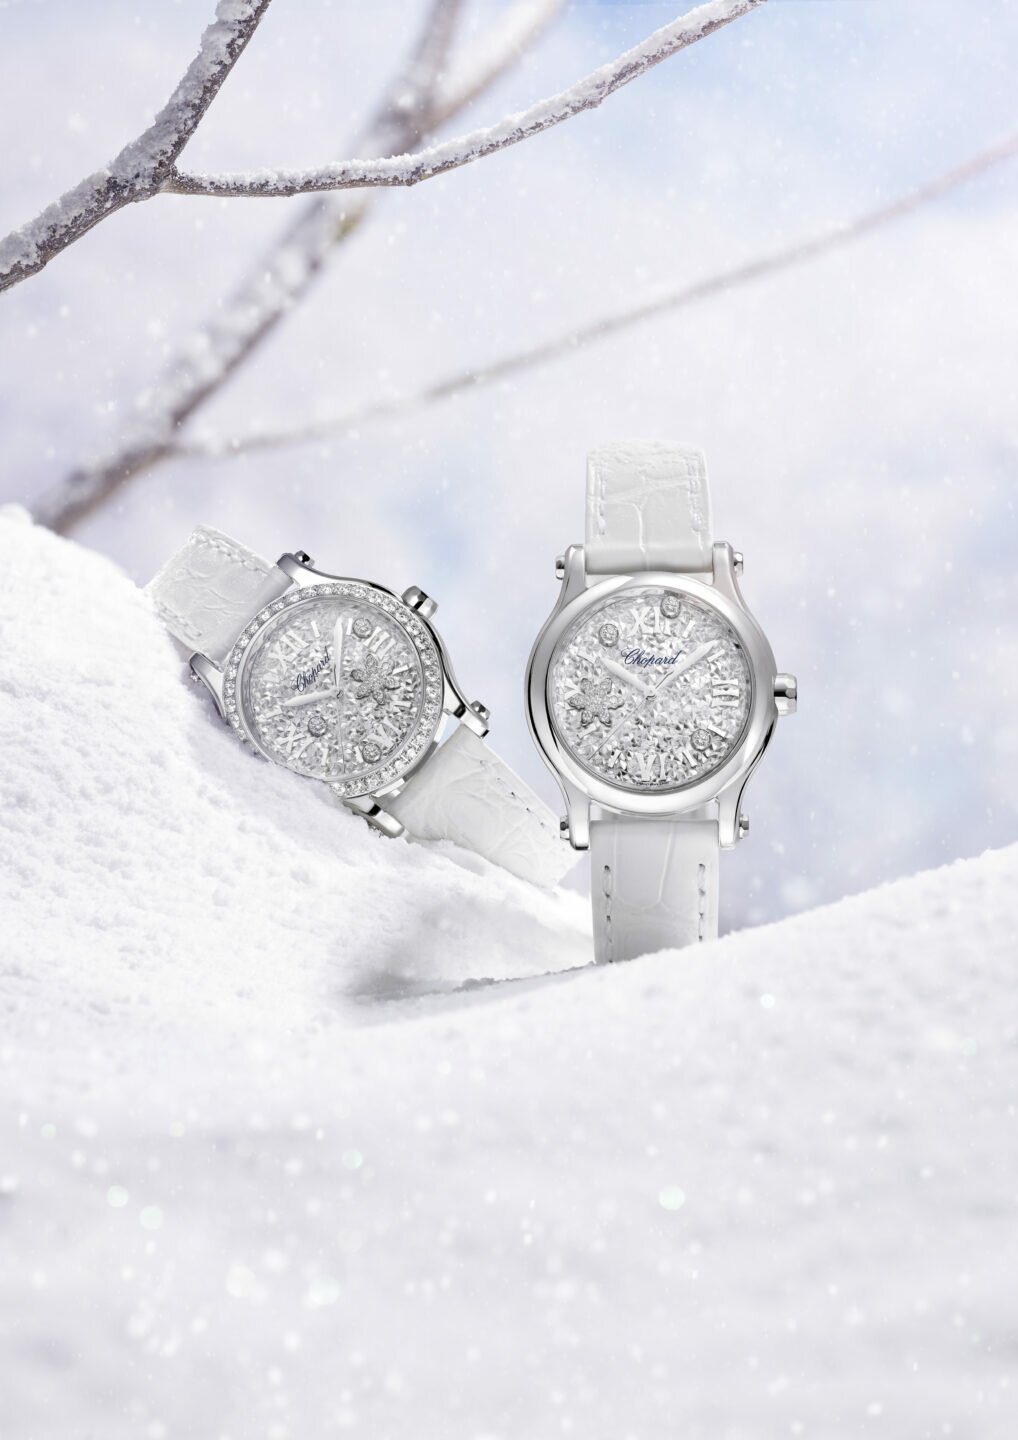 8 Christmas Gifts From Chopard To Impress Your Loved Ones